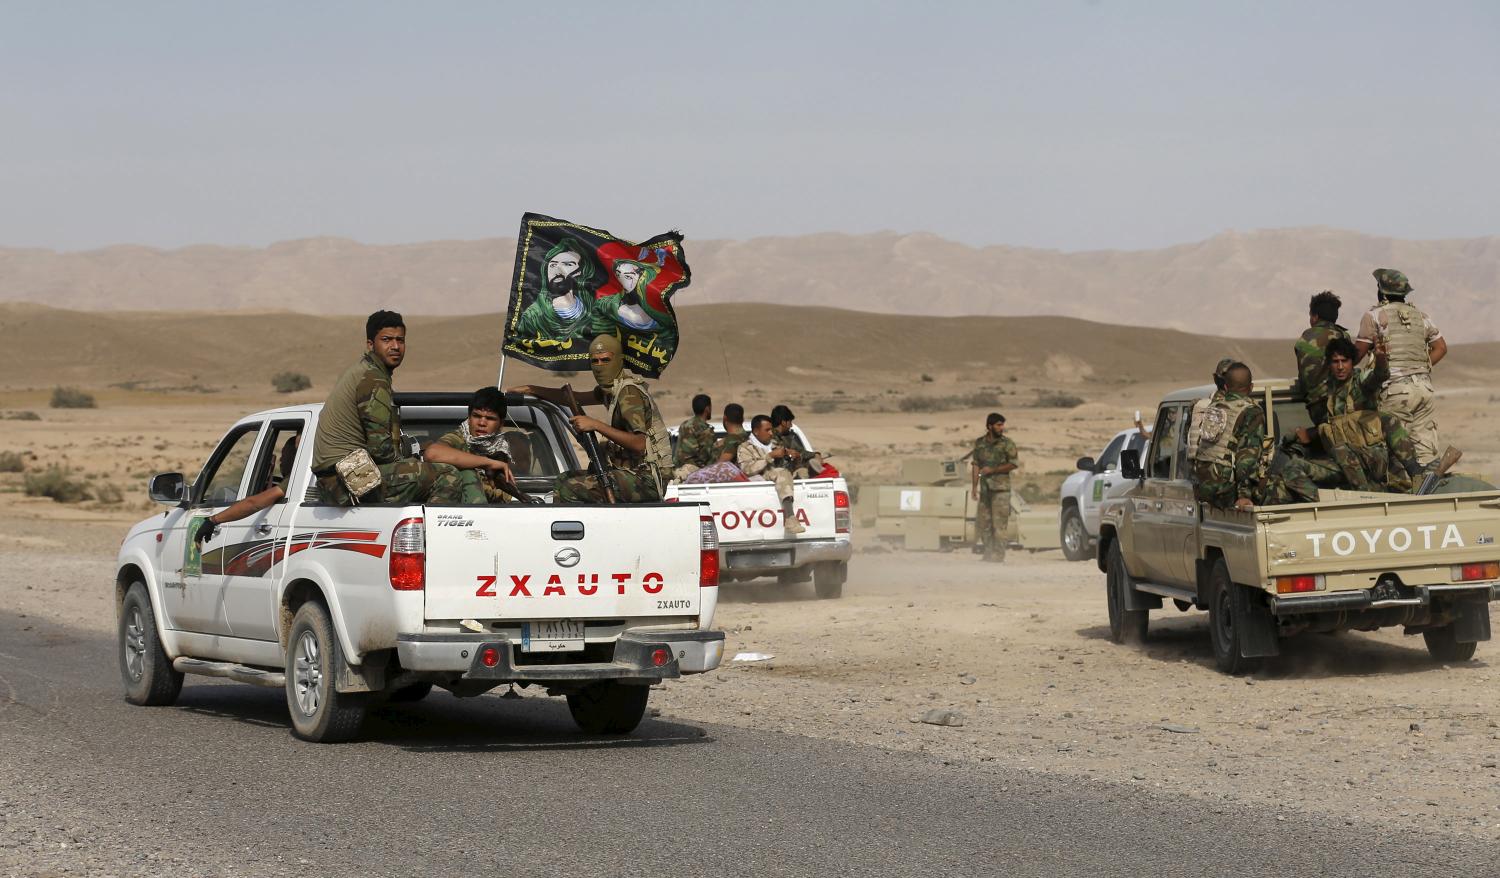 Shi'ite fighters ride on the back of a truck with their weapons in al-Fatha, northeast of Baiji, October 18, 2015. Iraqi forces backed by Shi'ite militia fighters say they have retaken a mountain palace complex of former President Saddam Hussein from Islamic State fighters, as government forces push ahead on a major offensive against the insurgents.   REUTERS/Thaier Al-Sudani  - GF10000249718